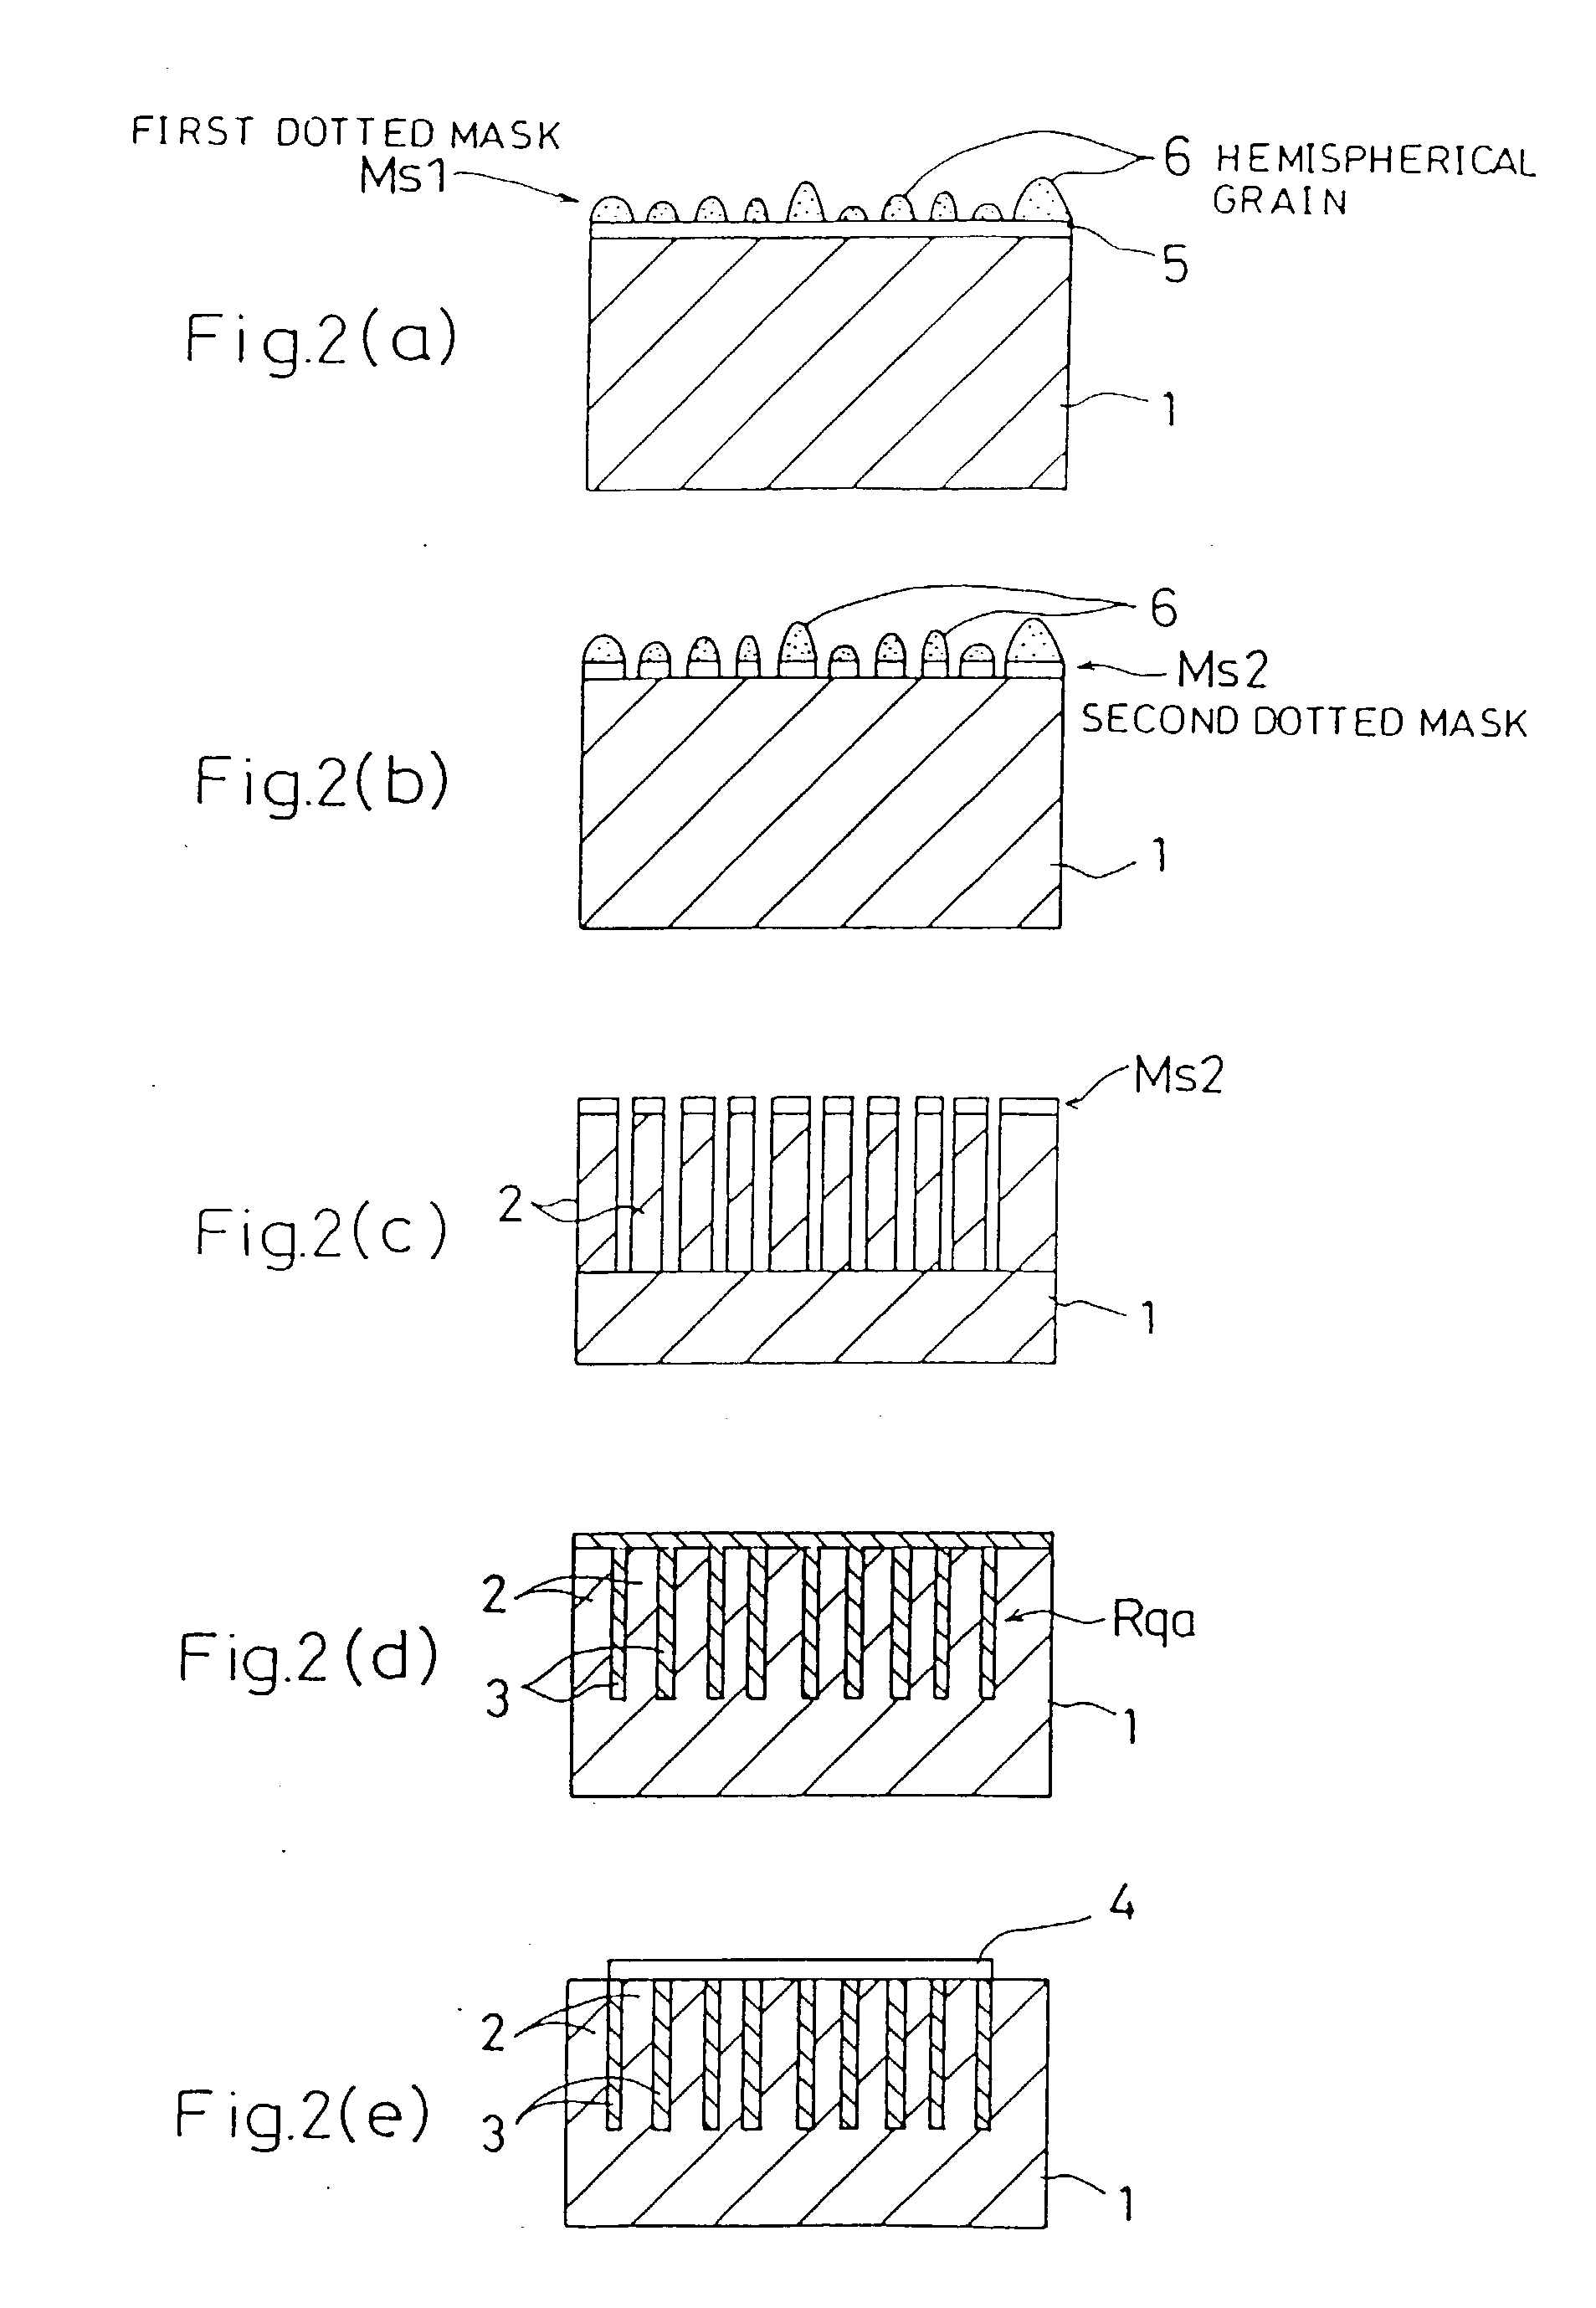 Aggregate of Semicnductor micro-needles and method of manufacturing the same, and semiconductor apparatus and method of manufacturing the same